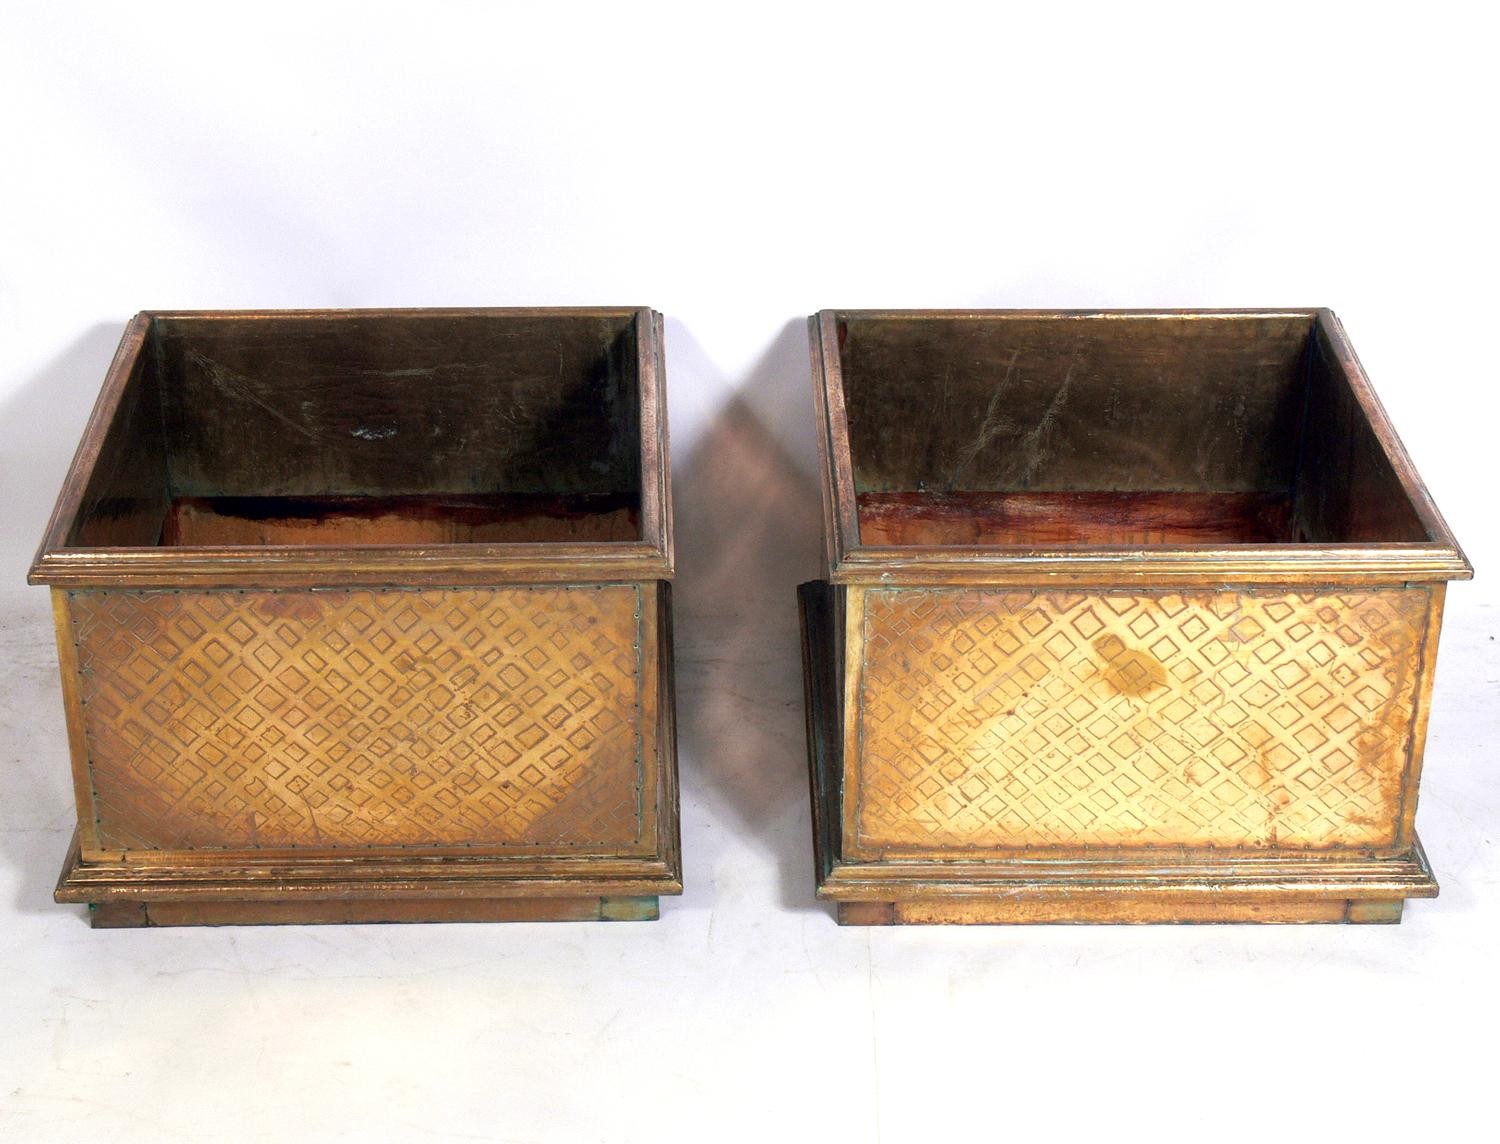 Pair of large-scale brass planters by Rodolfo Dubarry, Spanish, circa 1960s. Signed with impressed signature 